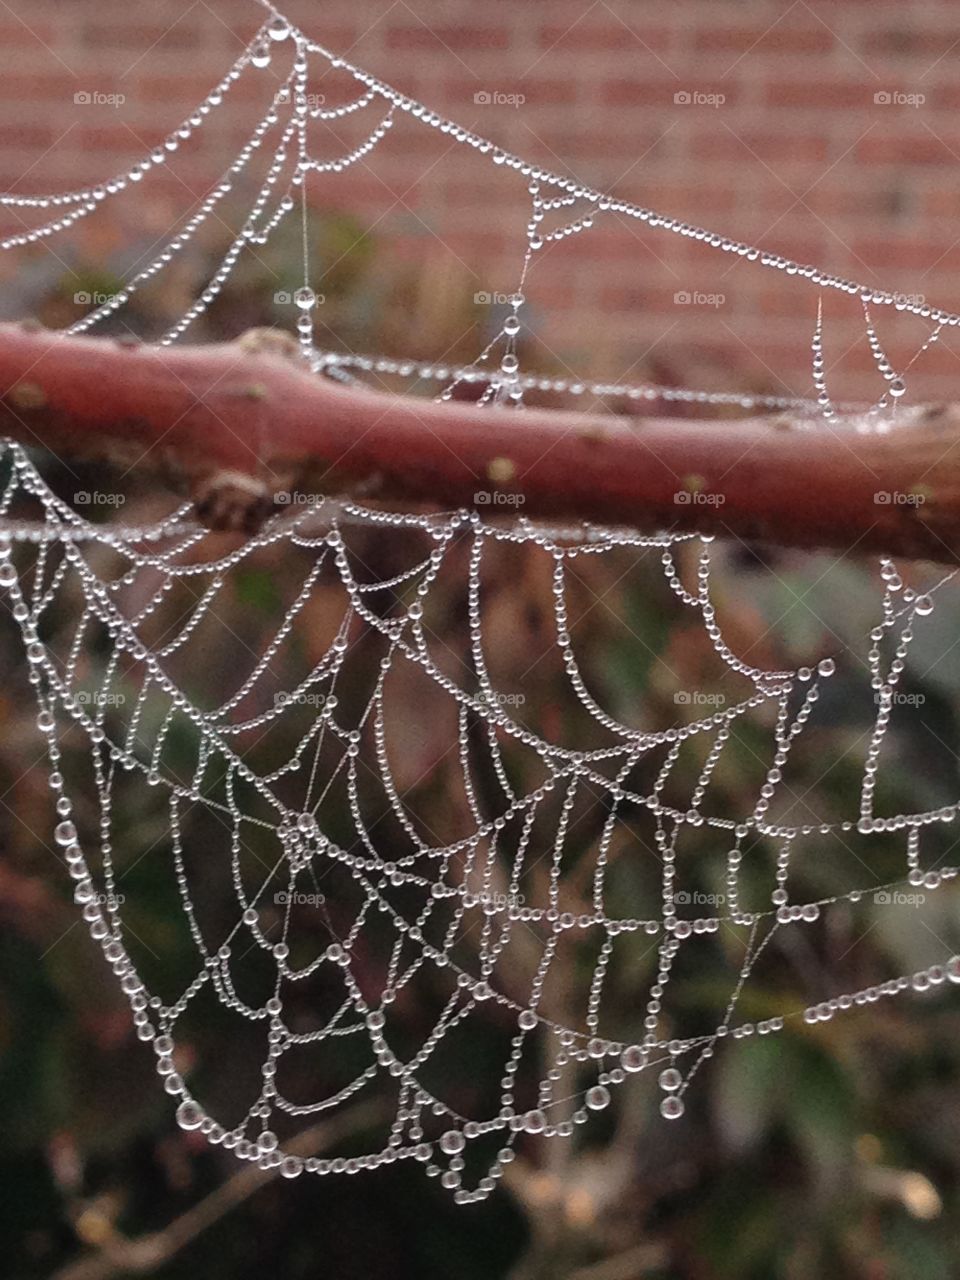 Spider web and dew